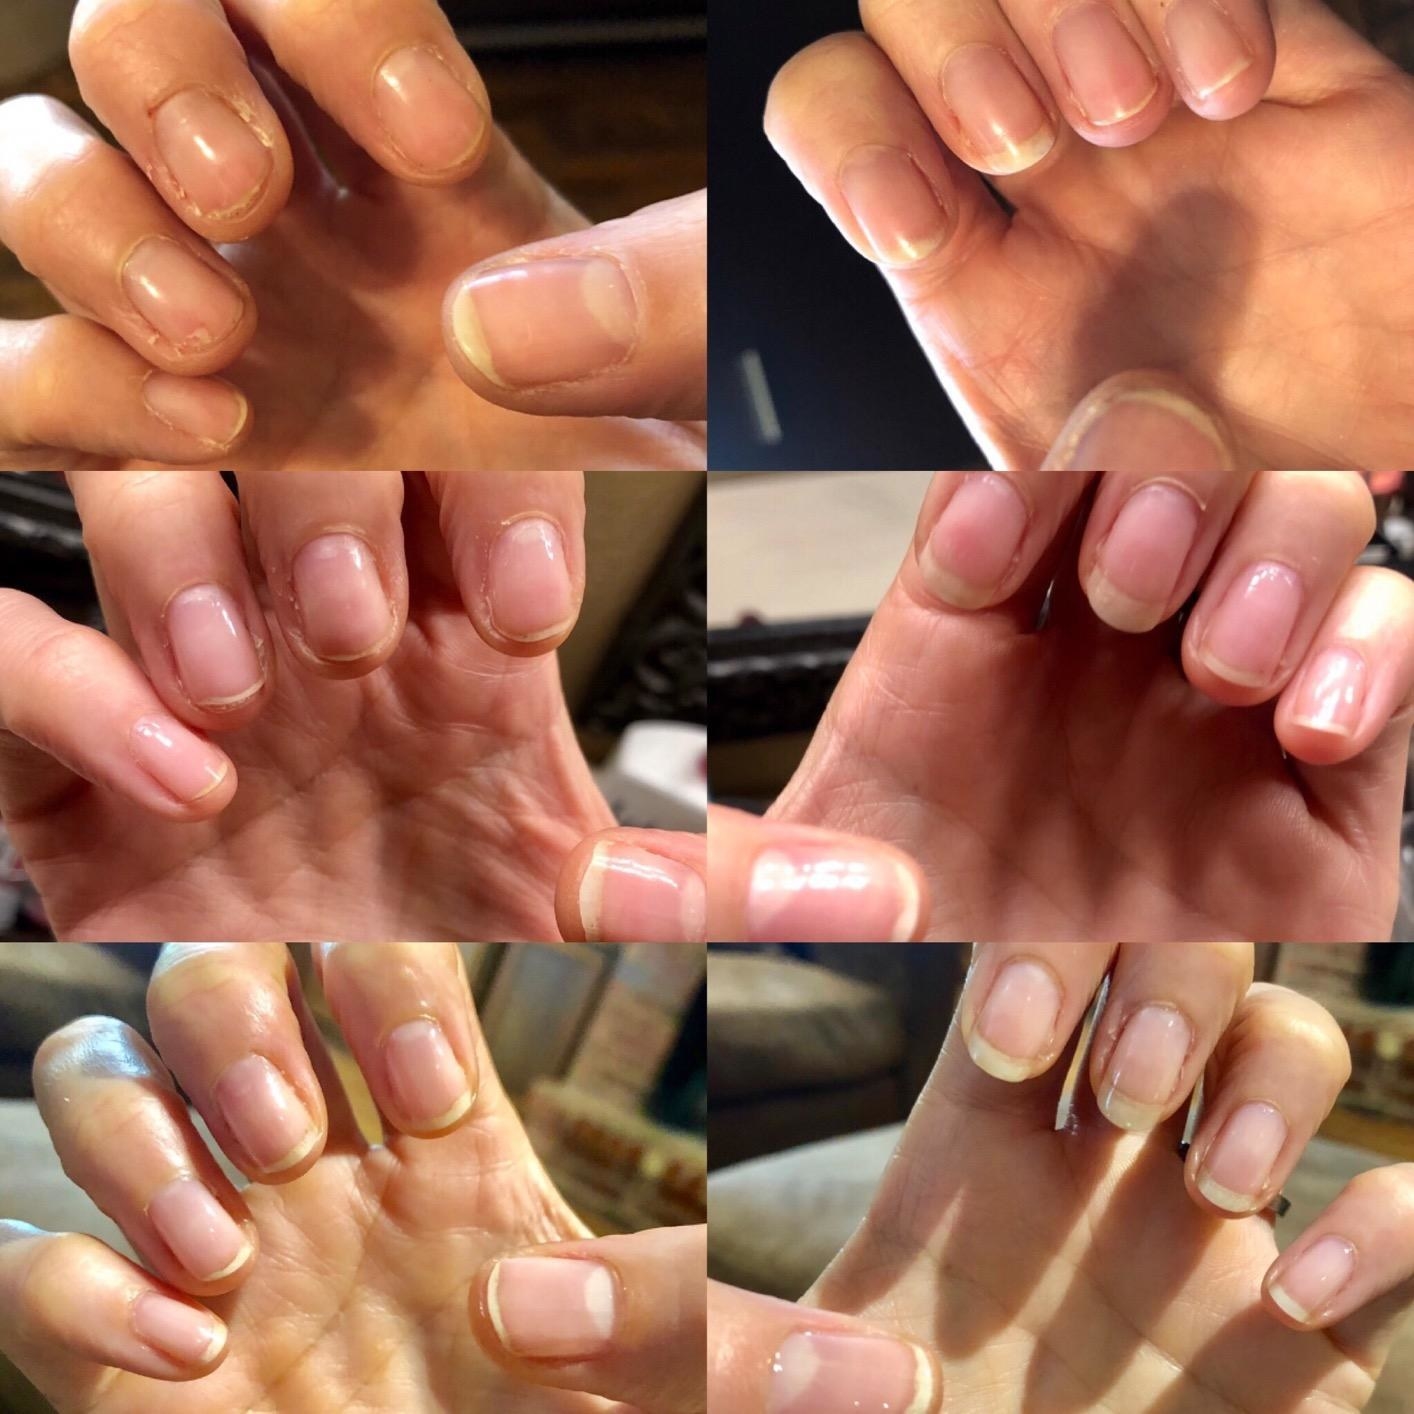 top left to bottom right: time progression of reviewer&#x27;s brittle, chipped nails to same reviewer&#x27;s nails looking stronger and less chipped at a later date